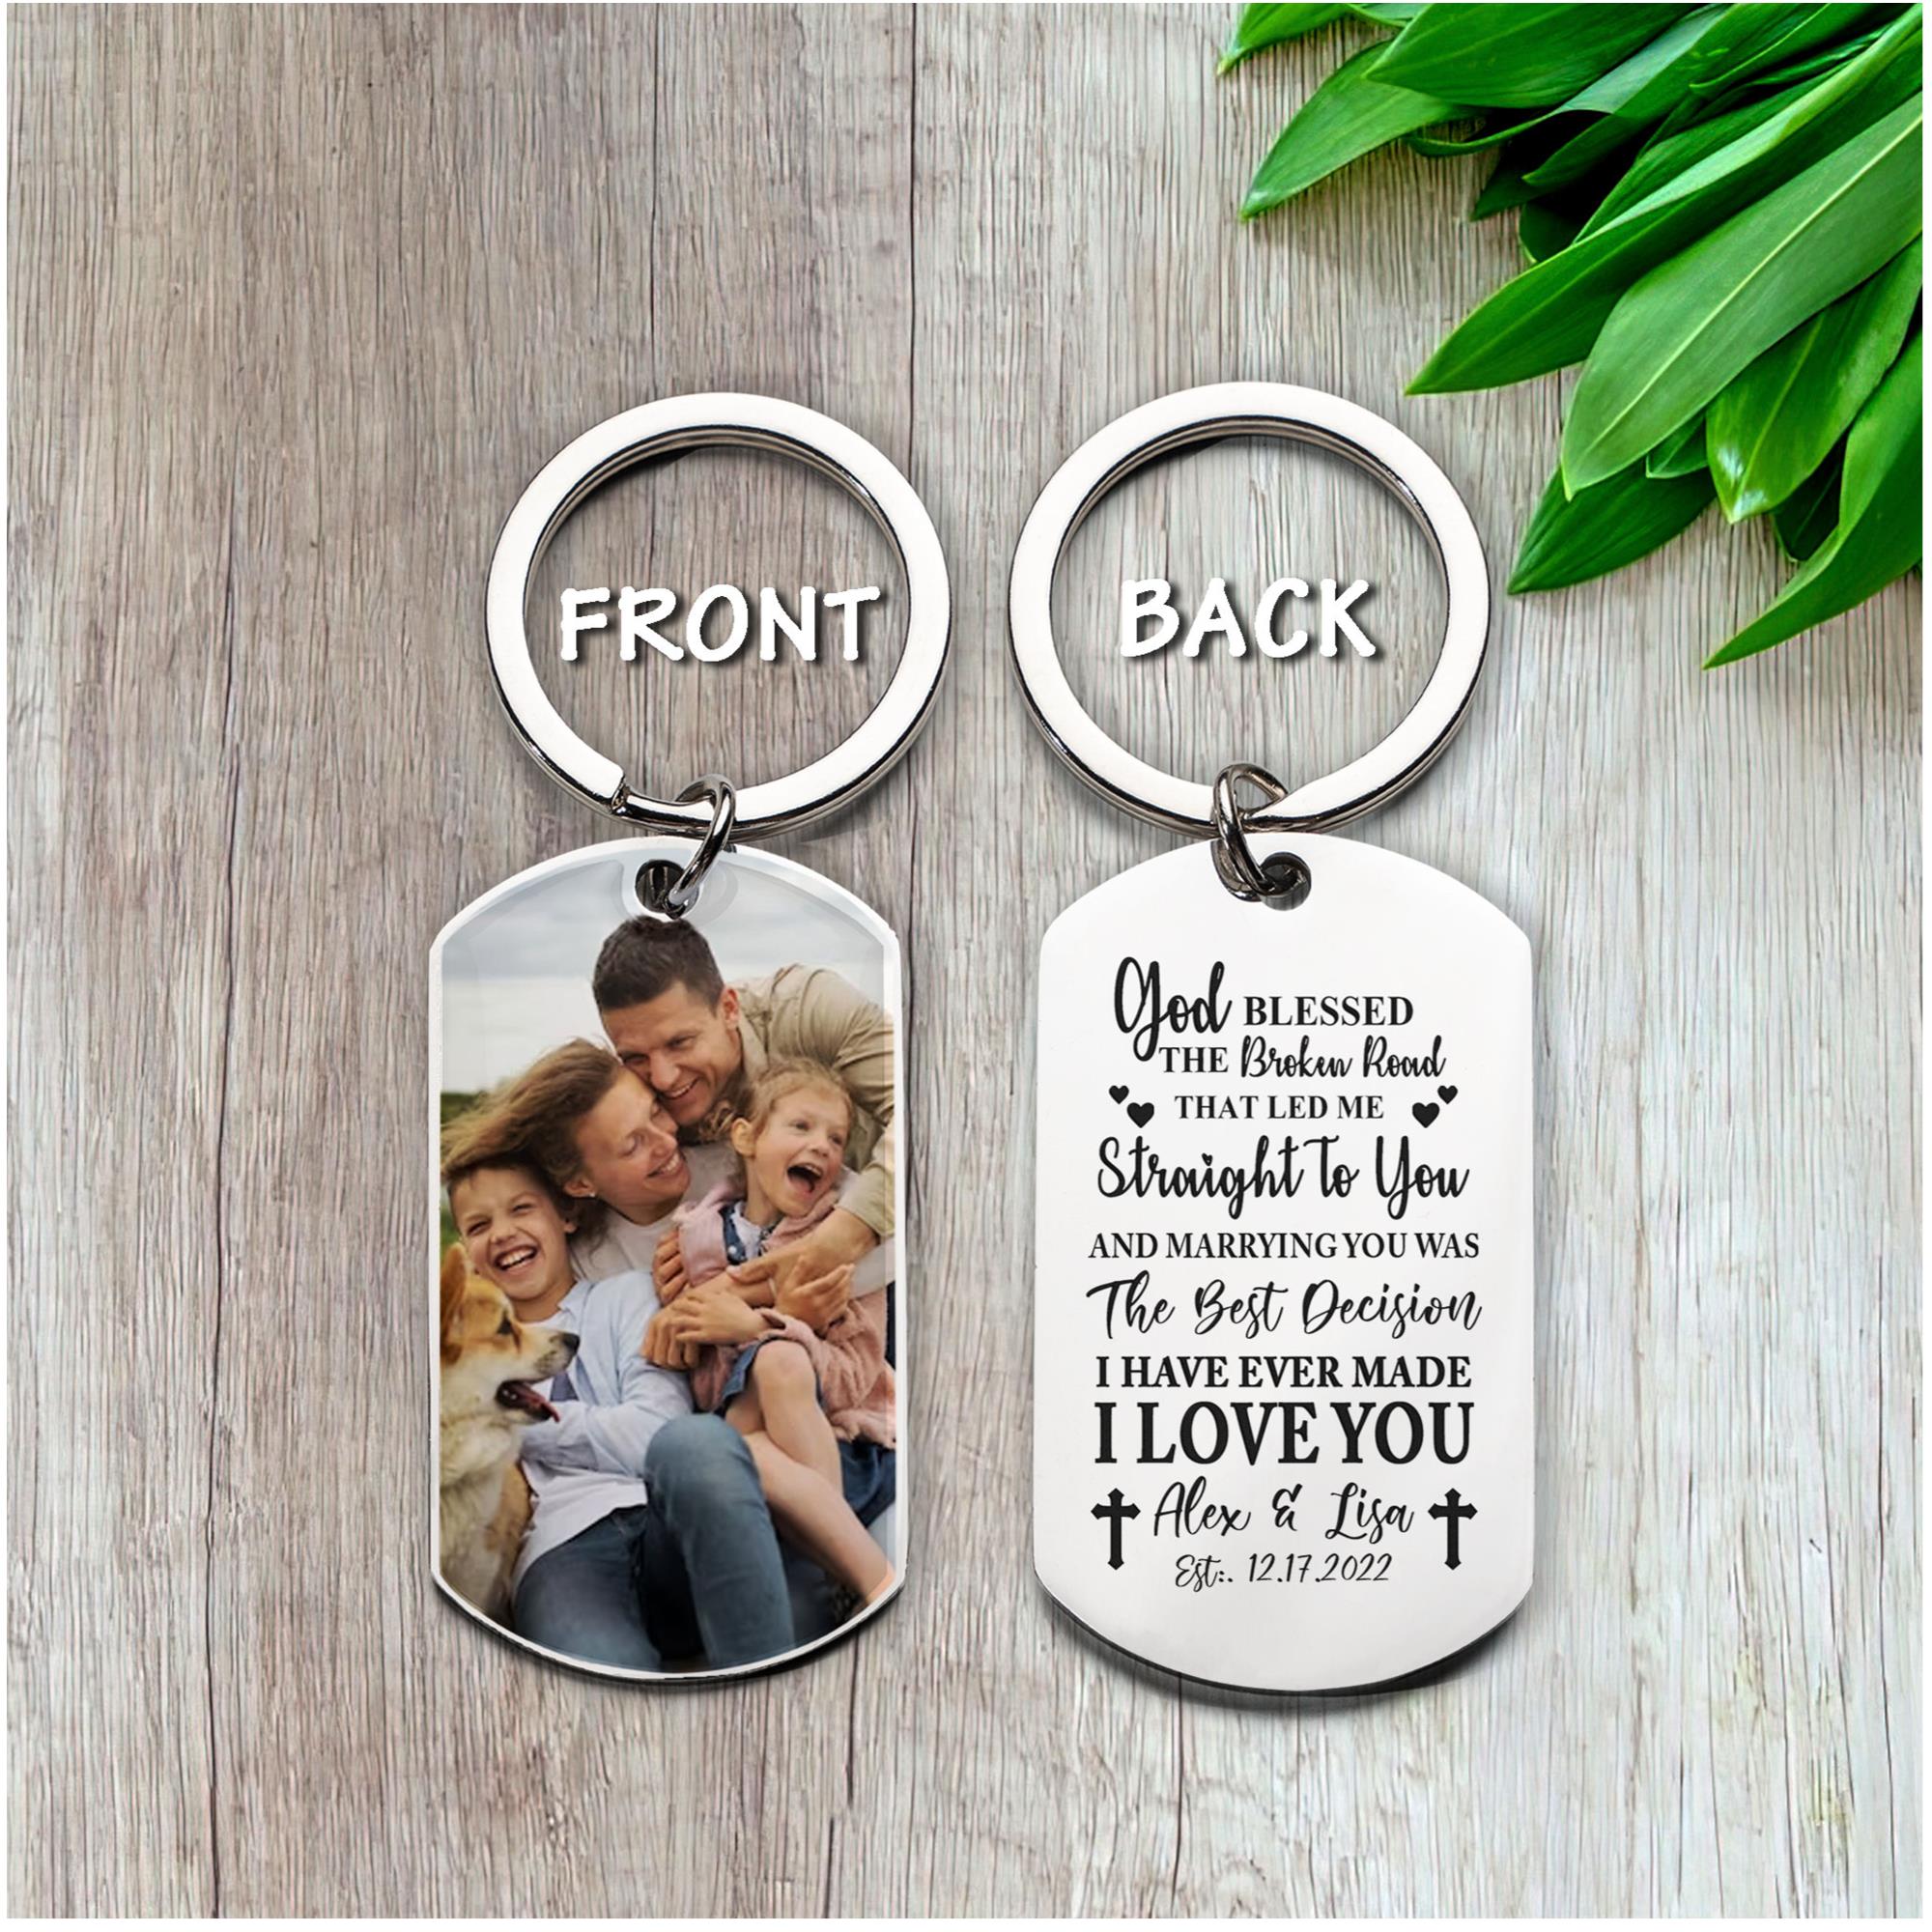 custom-photo-keychain-god-blessed-the-broken-road-led-me-straight-to-you-couple-personalized-engraved-metal-keychain-PI-1687859550.jpg